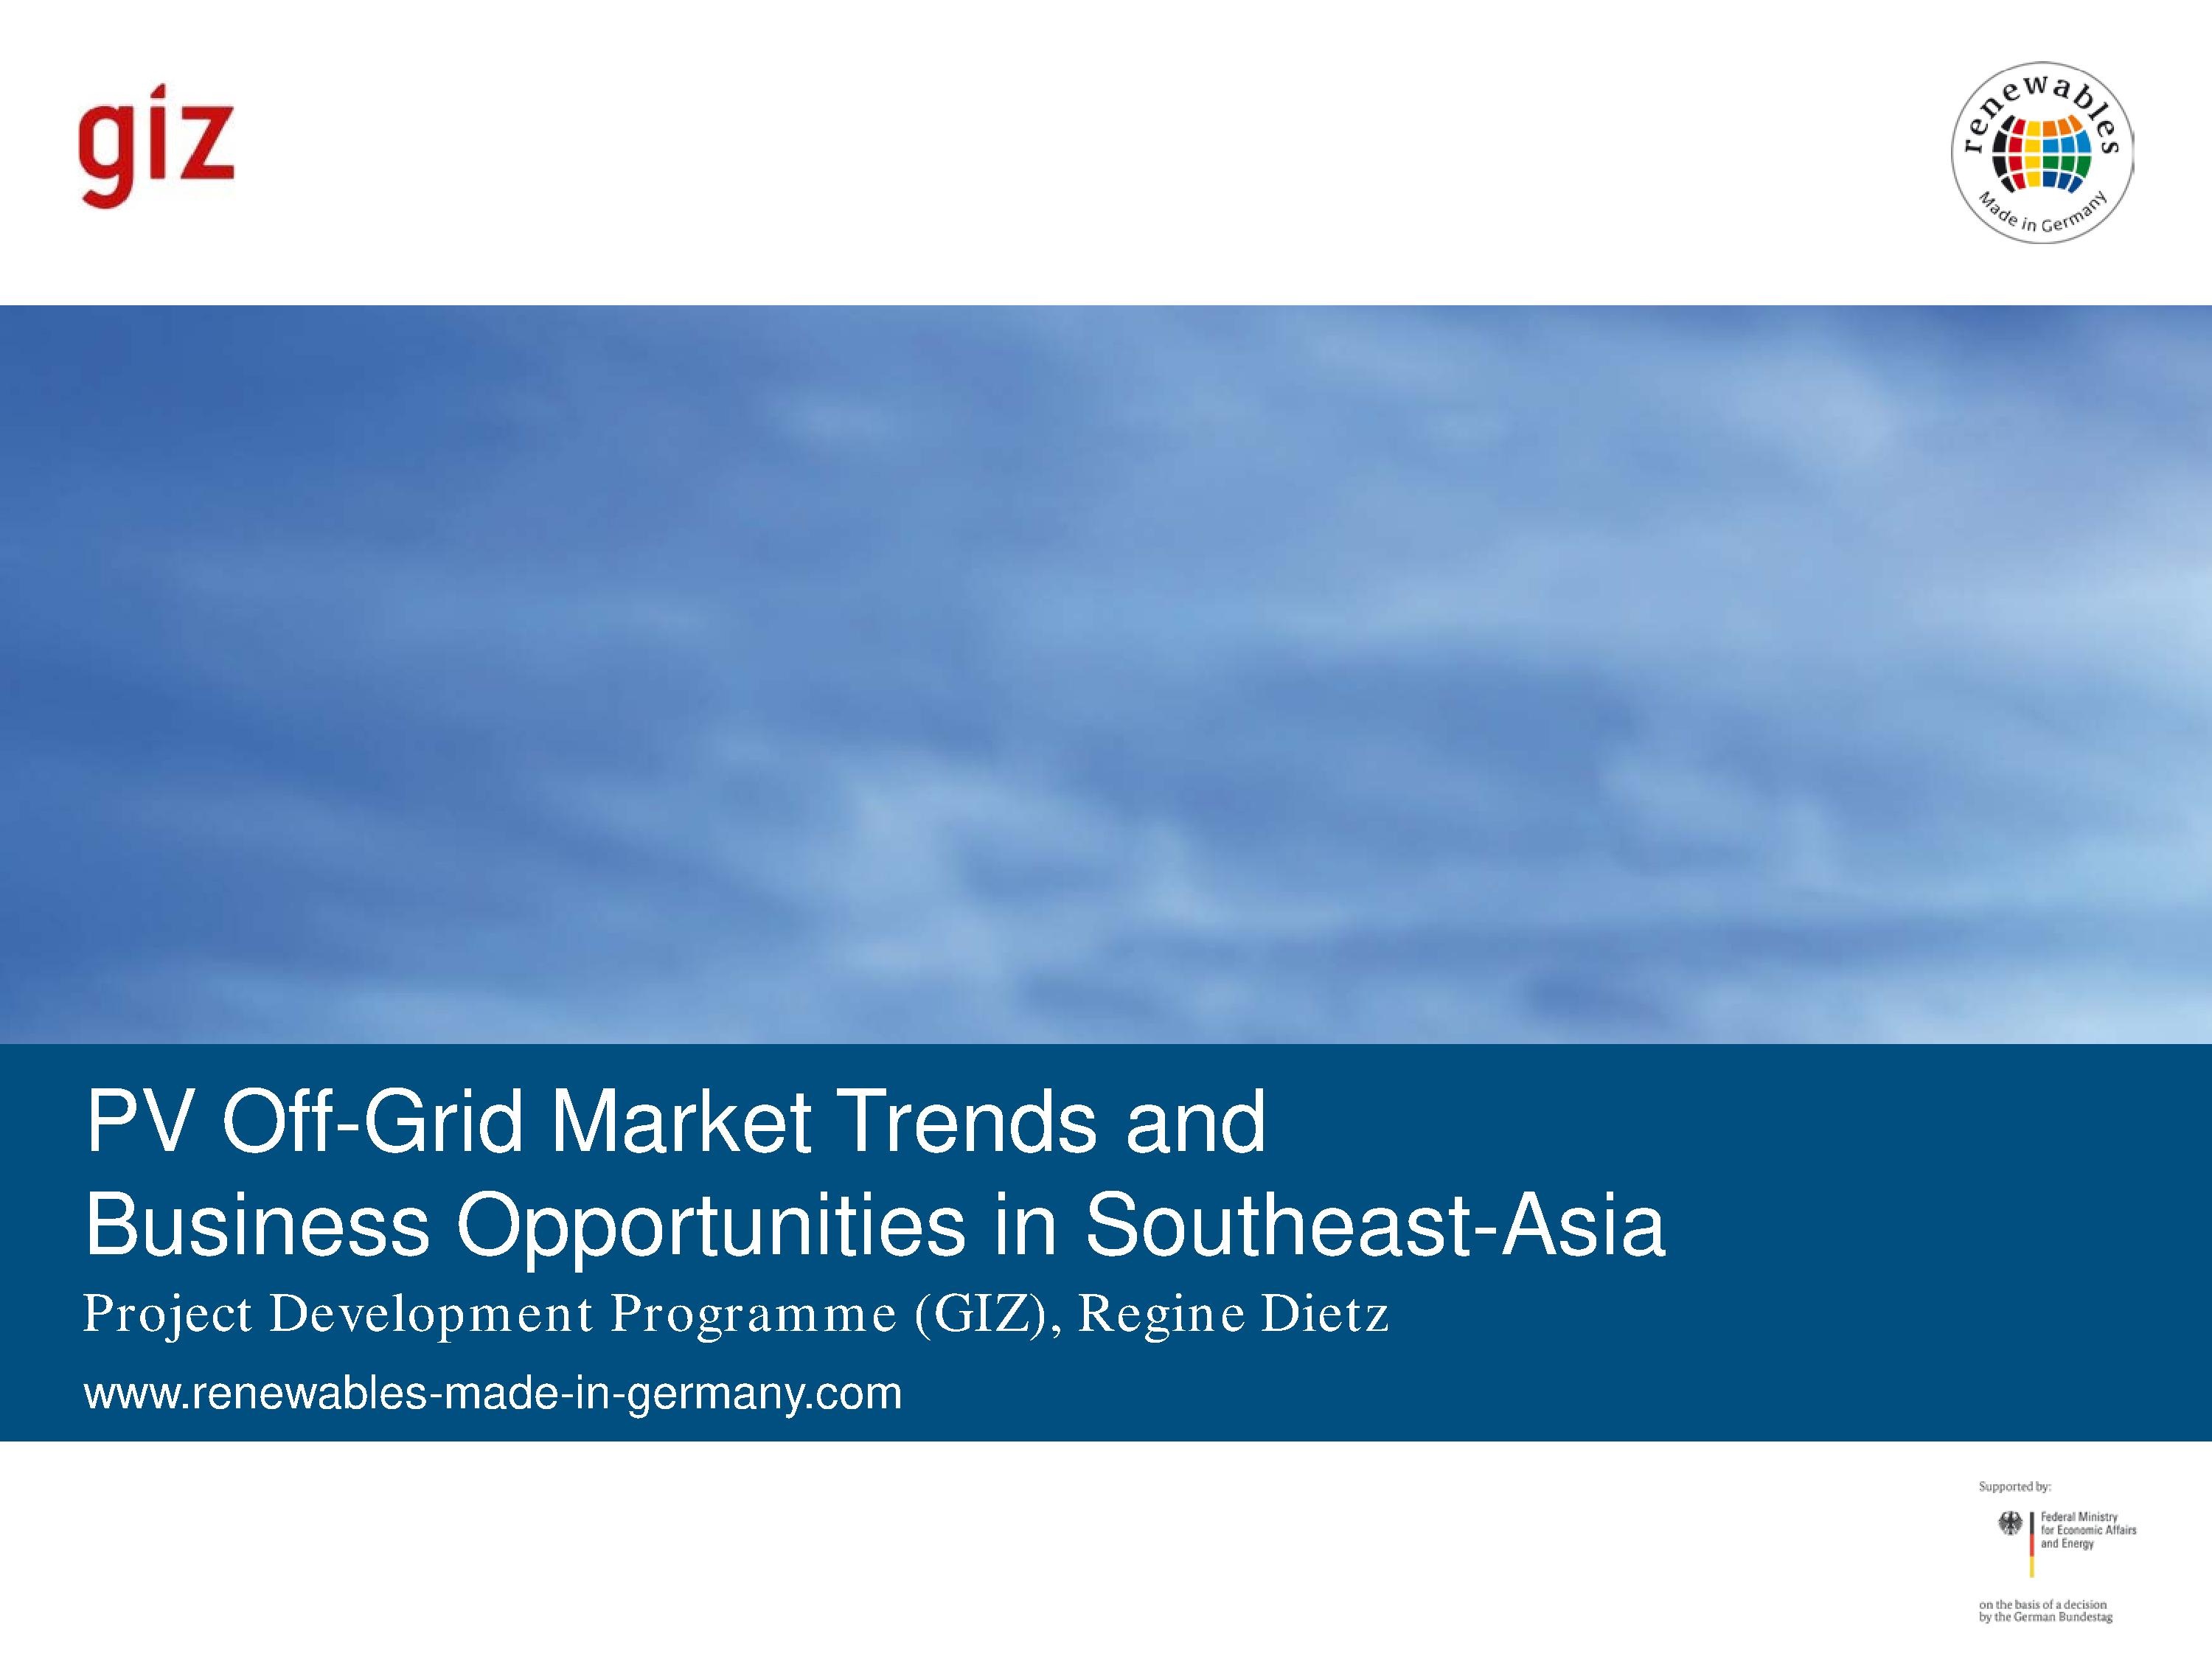 PV Off-Grid Market Trends and Business Opportunities in Asia